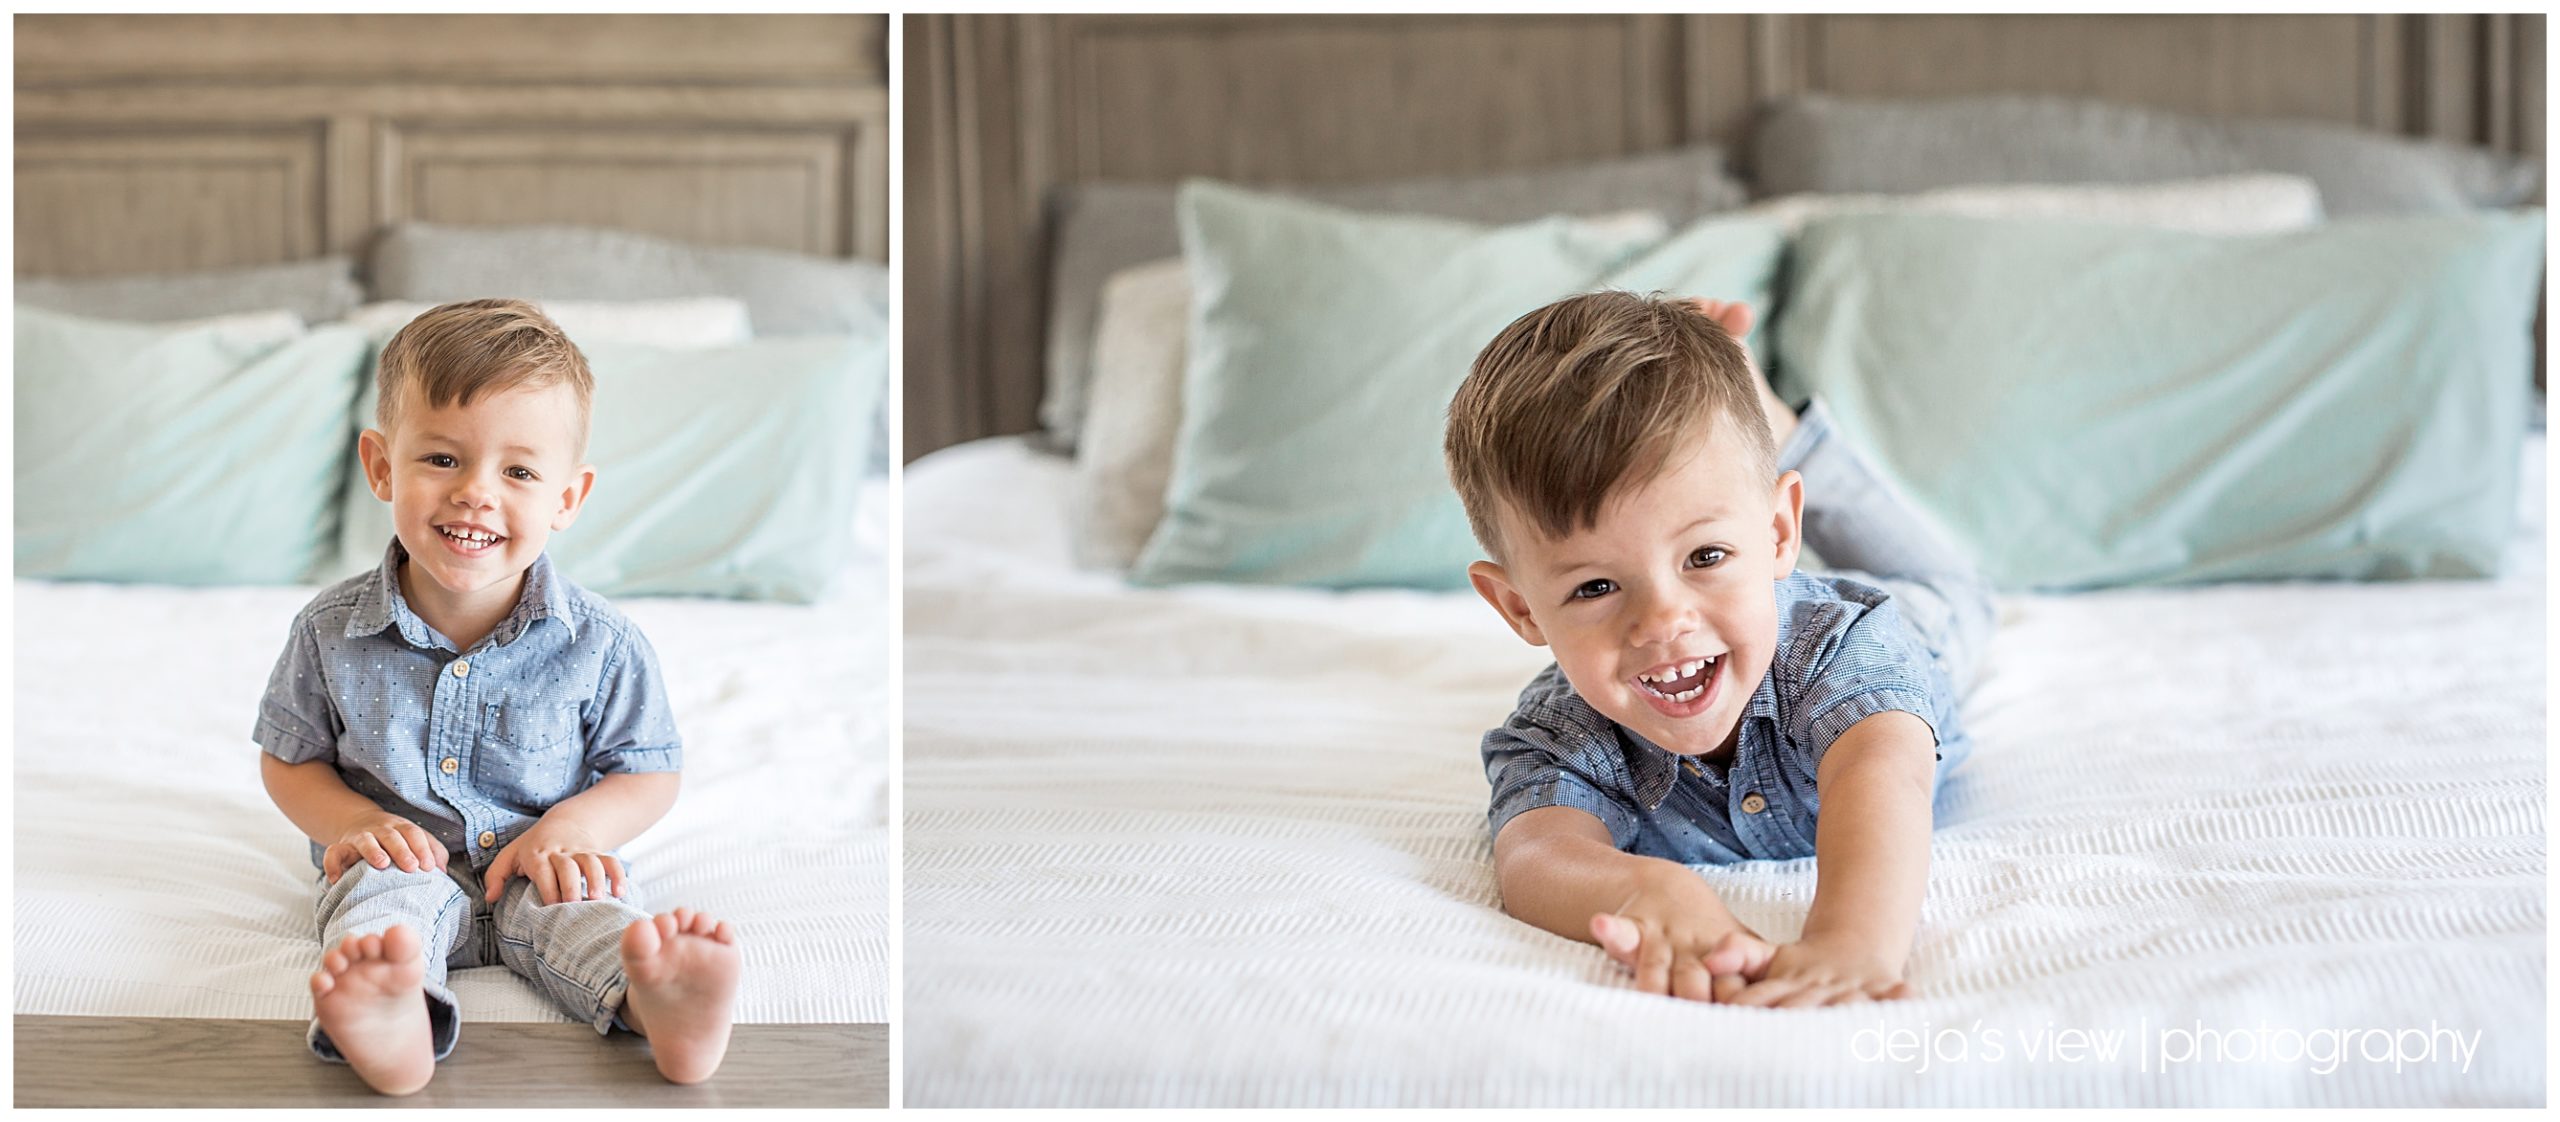 little boy smiling on bed